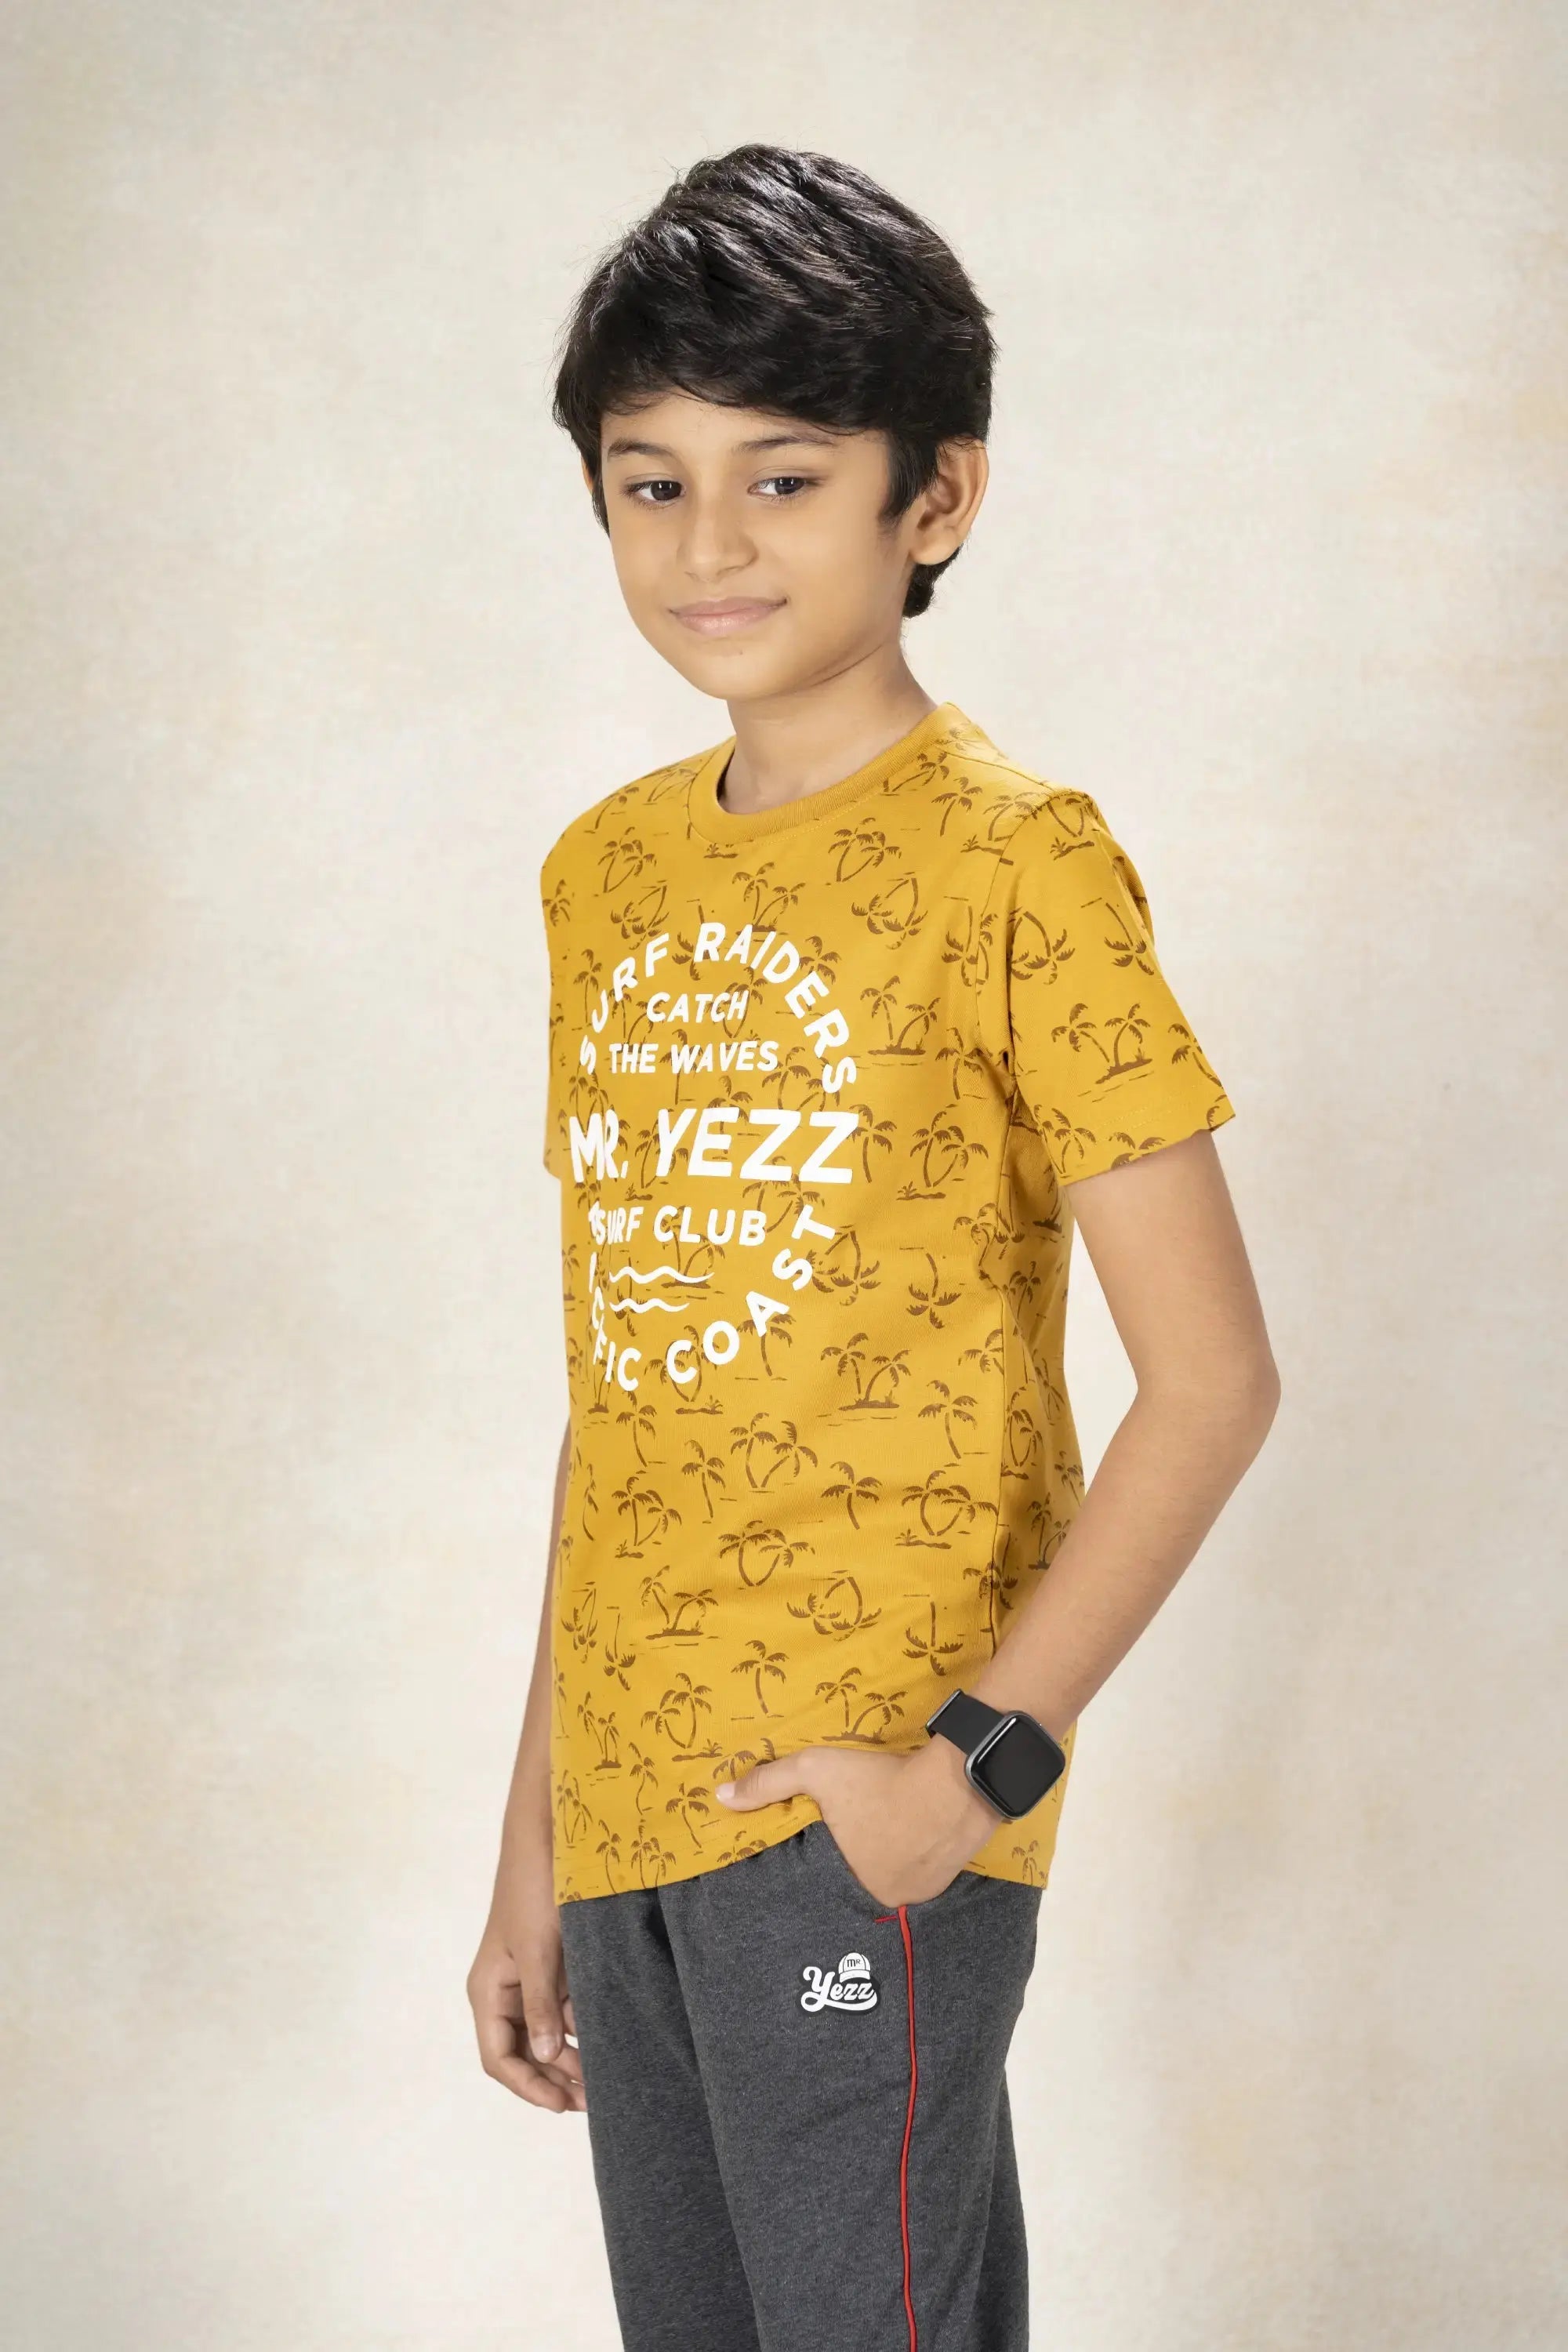 Boys Round Neck Printed T-Shirt MR YEZZ #color_Mineral Yellow